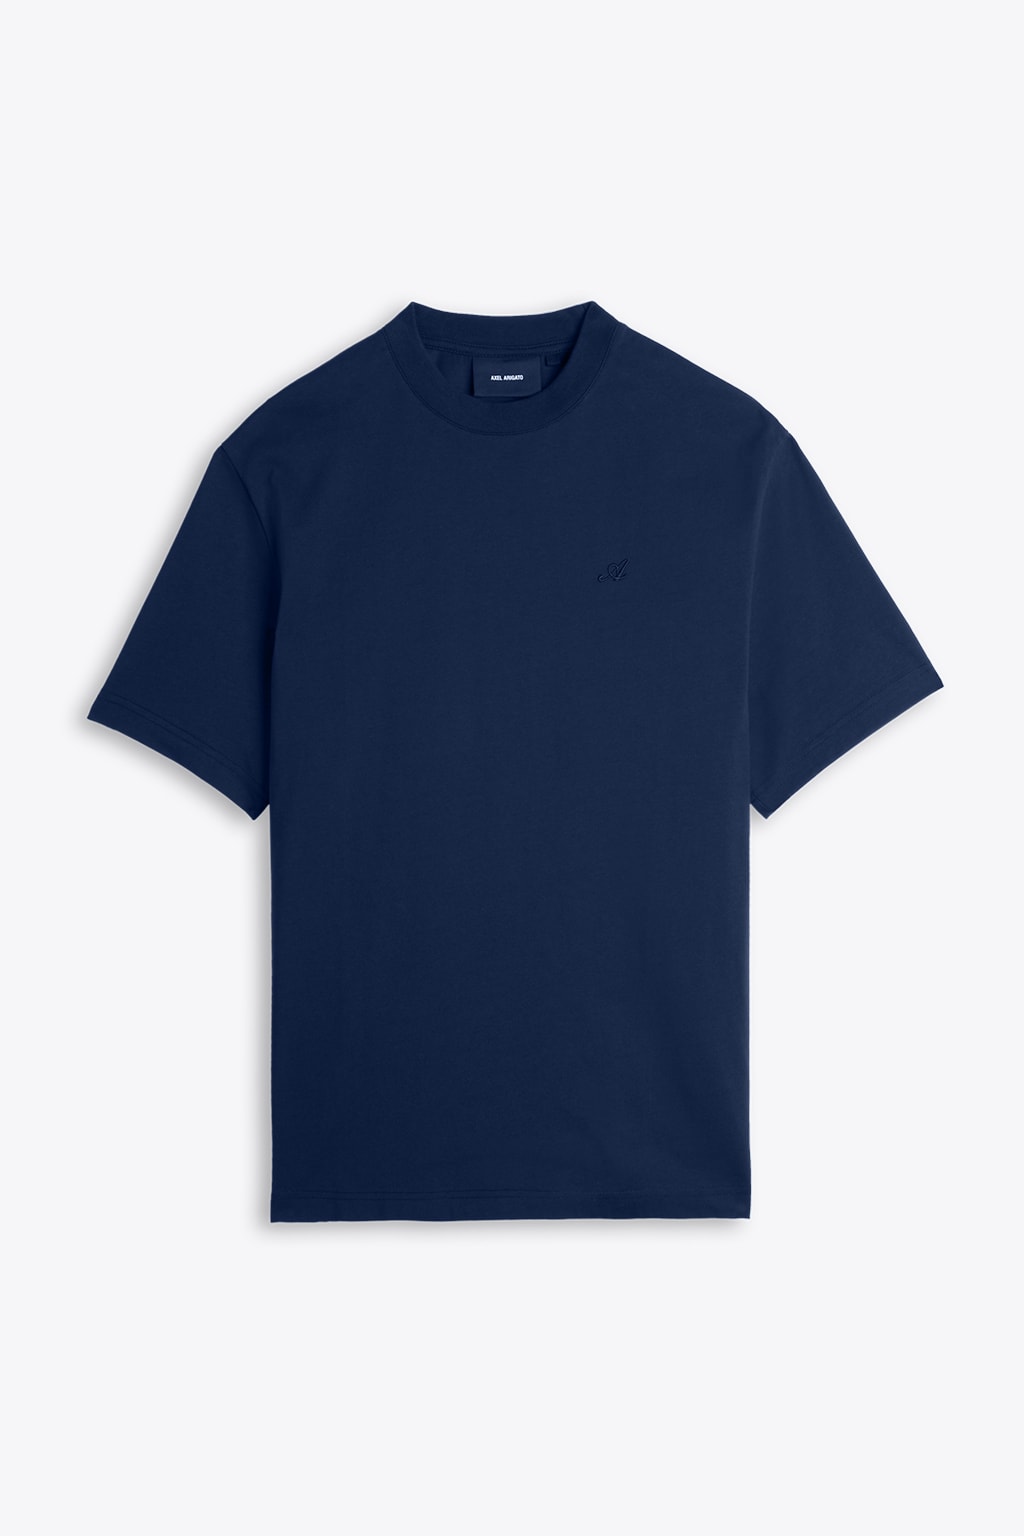 Signature T-shirt Navy Blue T-shirt With Chest Logo Embroidery - Signature T-shirt